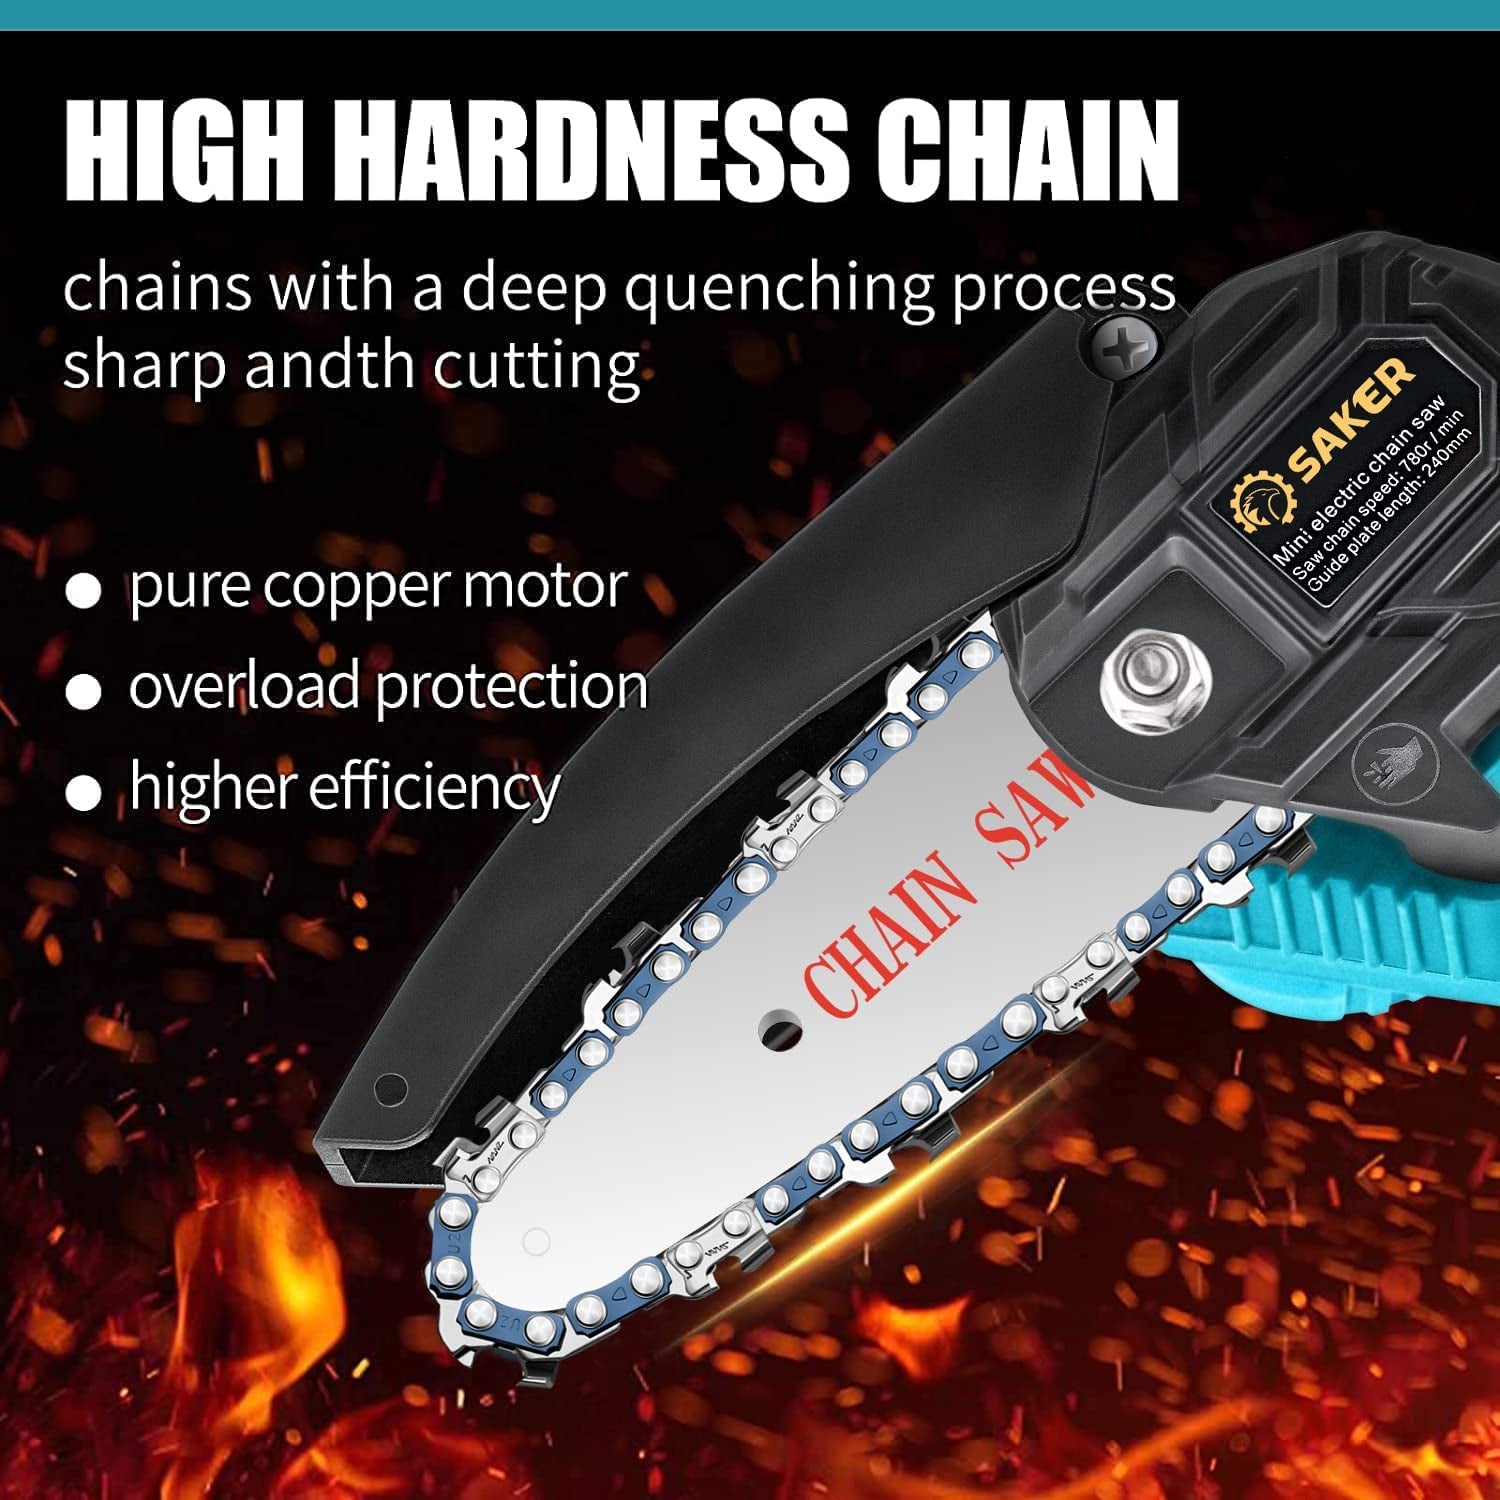 Mini Chainsaw,Portable Electric Cordless Chainsaw ,Battery Powered,Small Power Handheld Chain Saws Pruning Shears for Tree Branches,Courtyard and Garden,(2Pcs 20Vbatteries&3 PCS Chains)